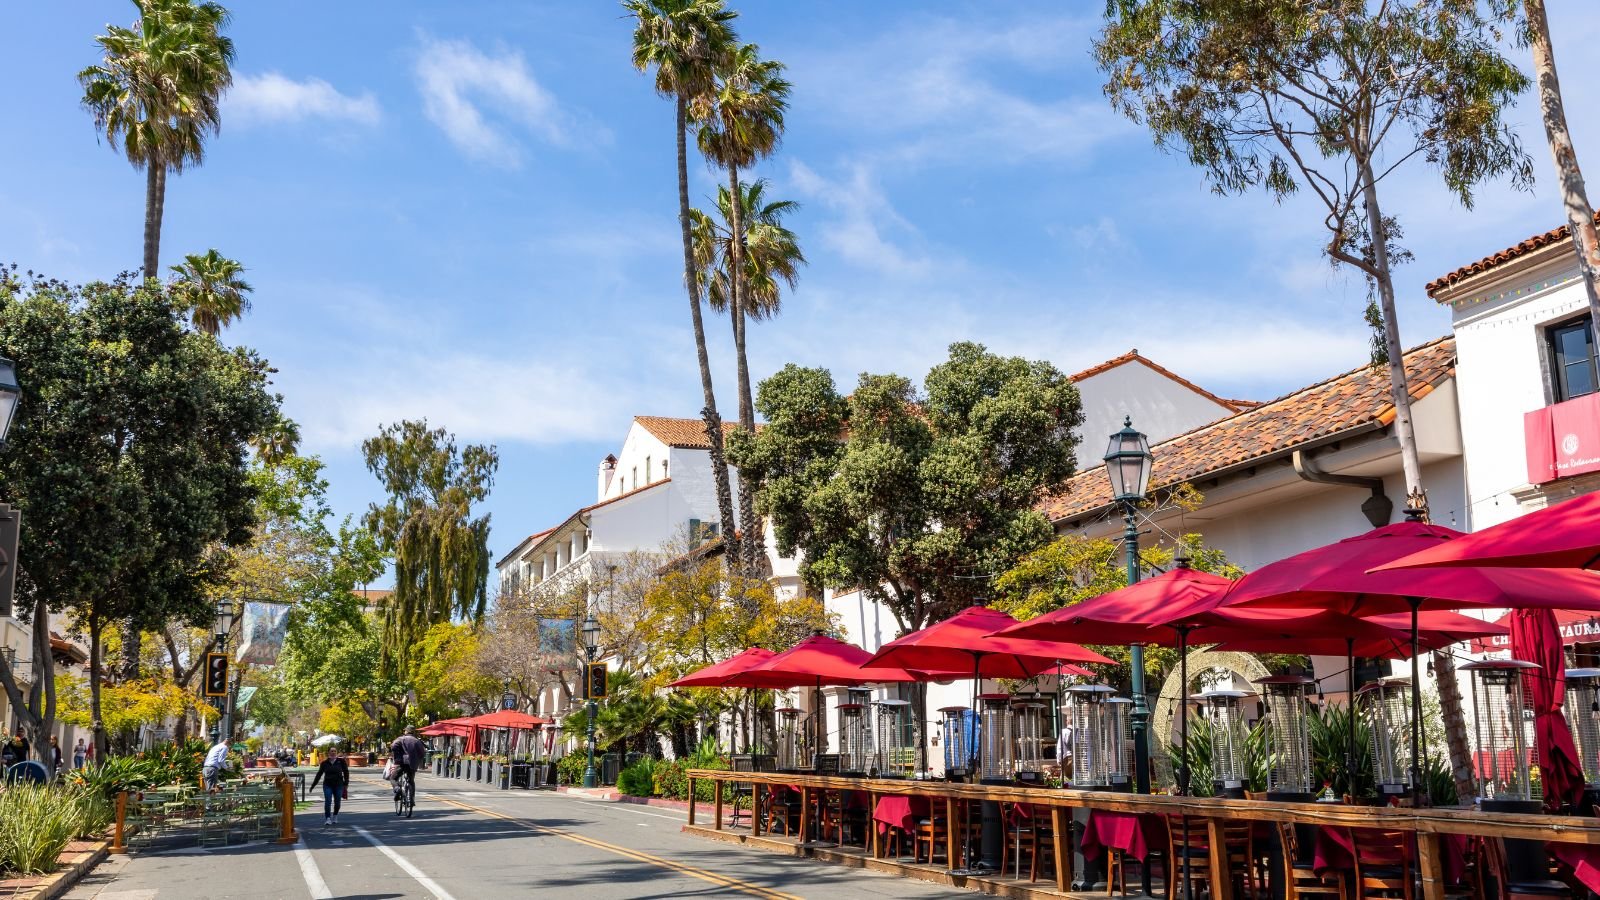 <p>Santa Barbara has an iconic coastal setting. It has high-end shopping and dining and immaculate architecture. It encapsulates the California dream. Mild weather year-round keeps patios bustling and makes the long white-sand beaches enticing.</p>